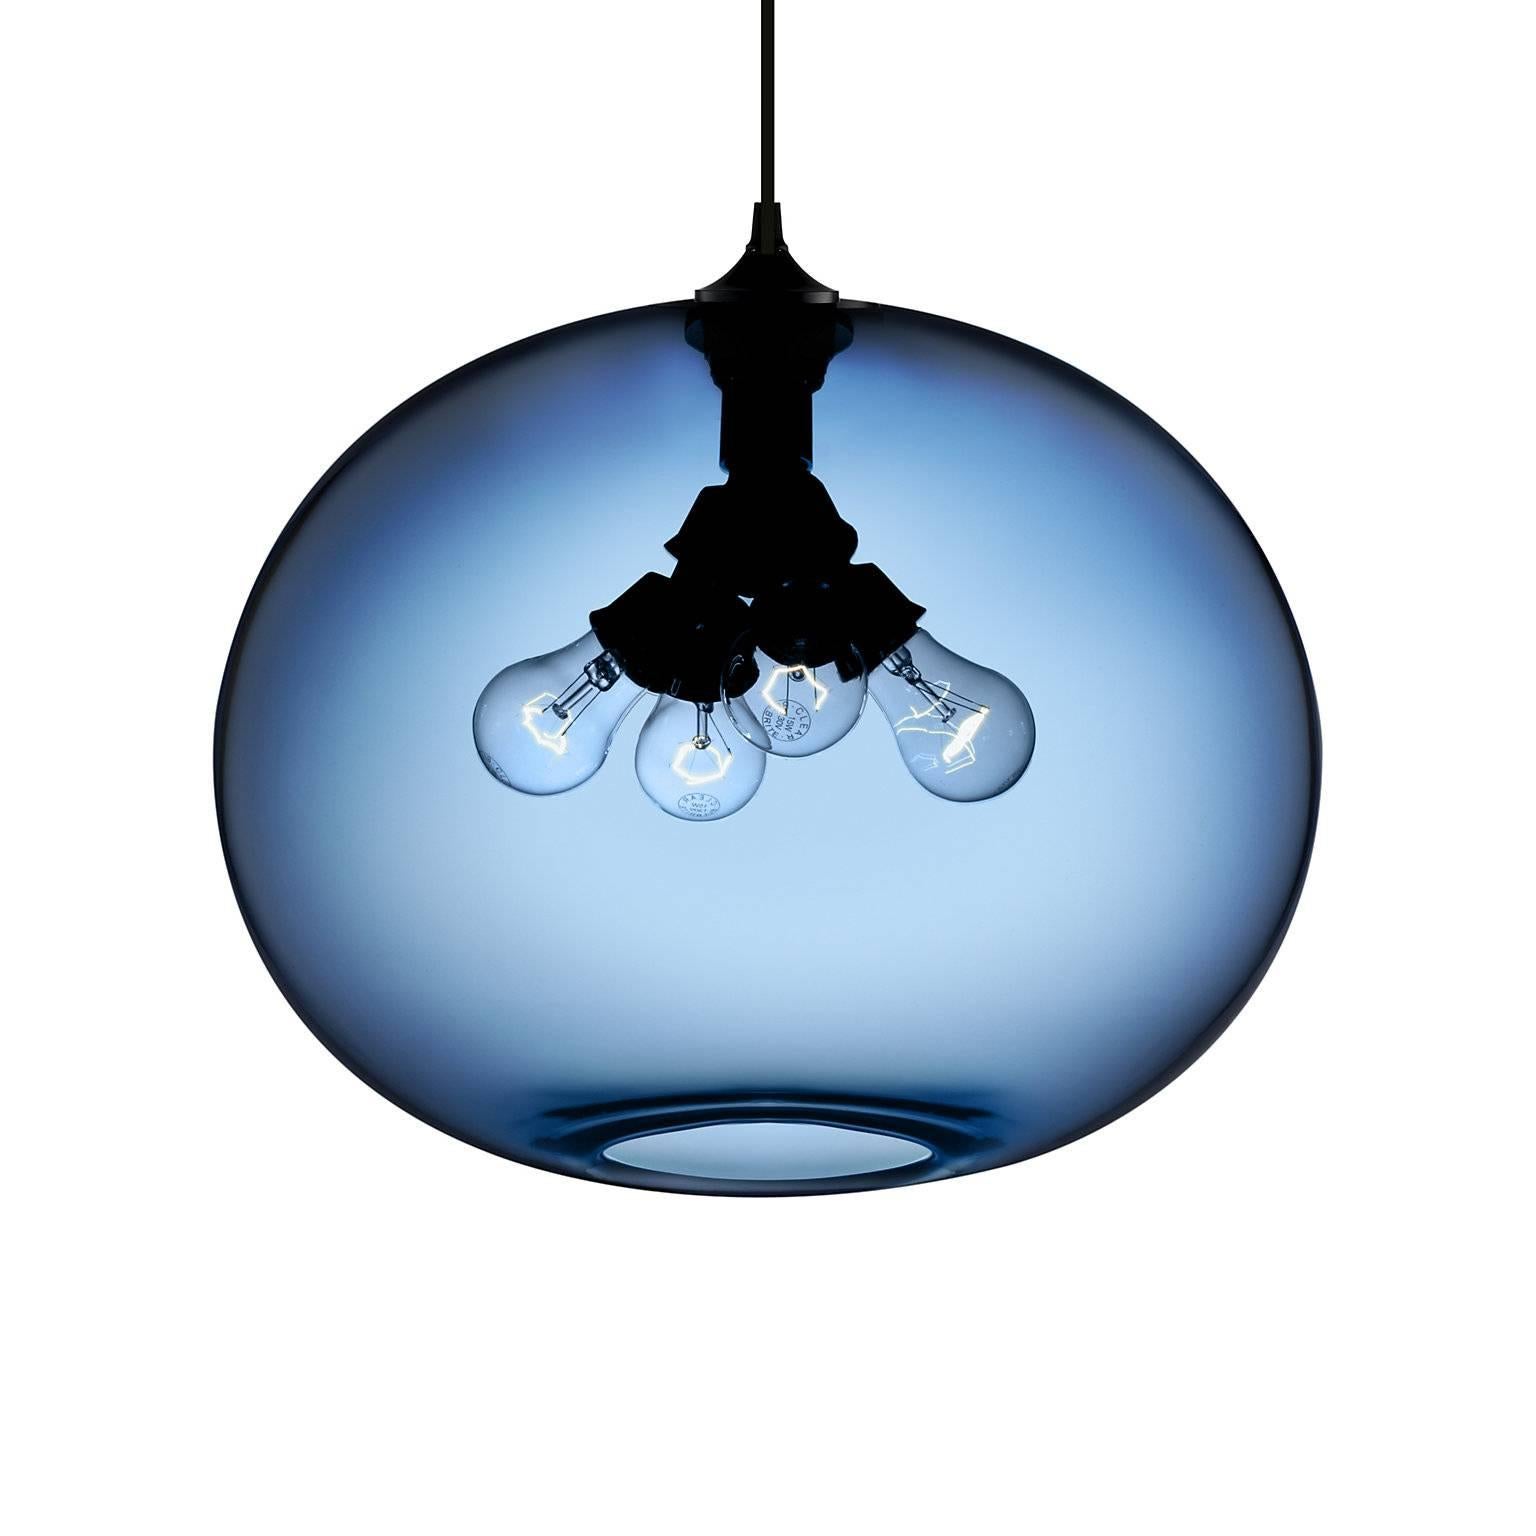 The allure of the abundant Terra is the presence of four bulbs at the pendant’s centre, radiating rich, ambient light. Every single glass pendant light that comes from Niche is hand-blown by real human beings in a state-of-the-art studio located in